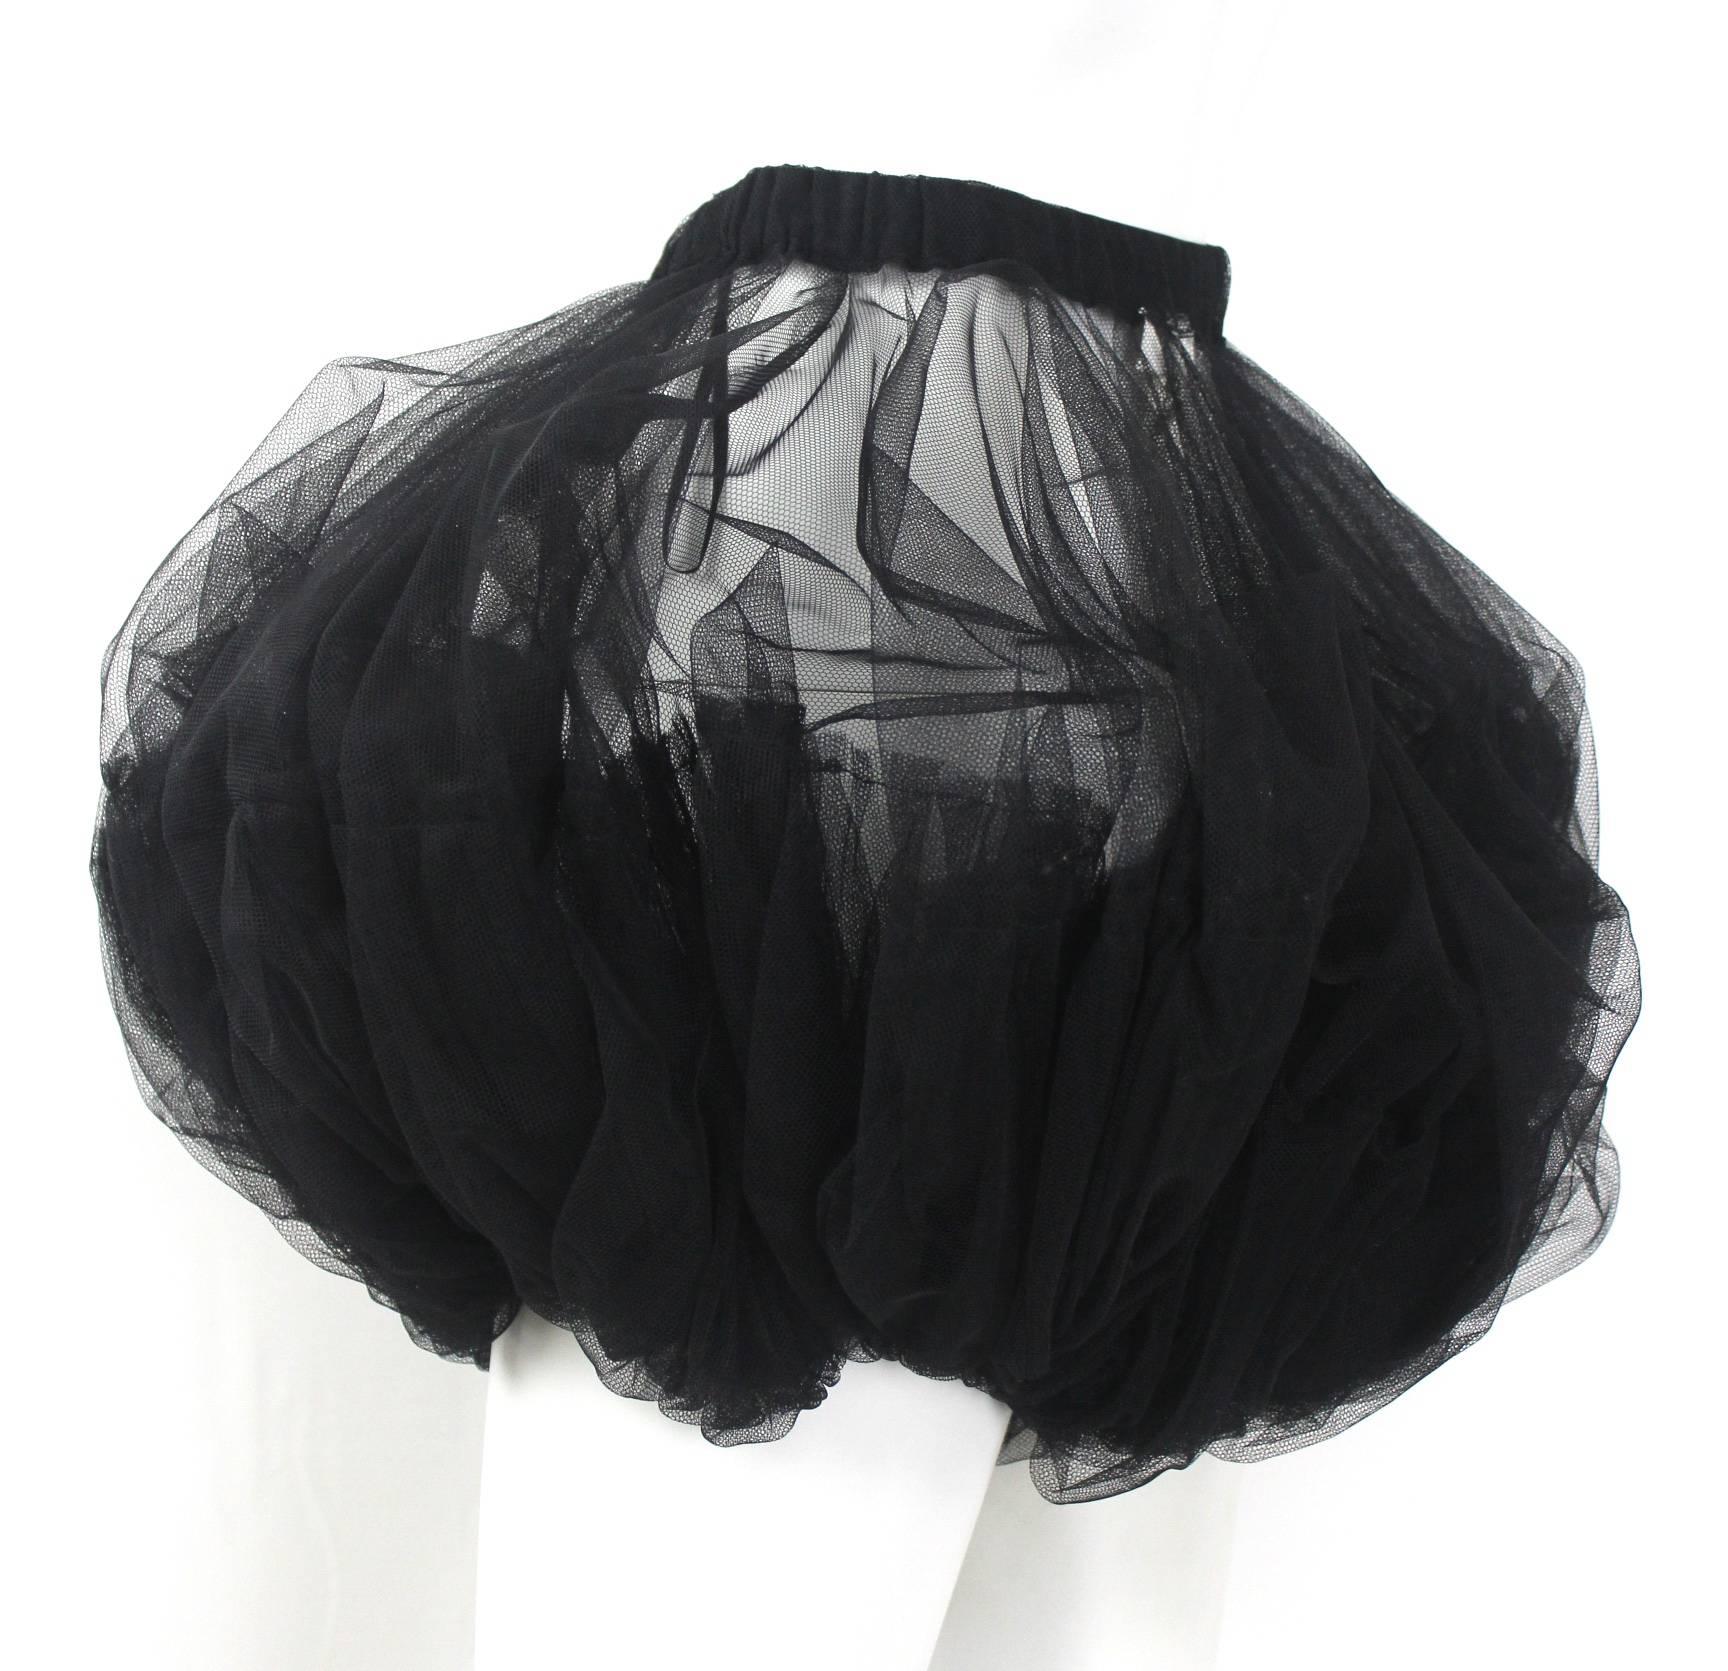 Comme des Garcons 2008 Collection
Tulle Runway Shorts
Elasticated and Drawstring Waist
Labelled size SS
Excellent condition